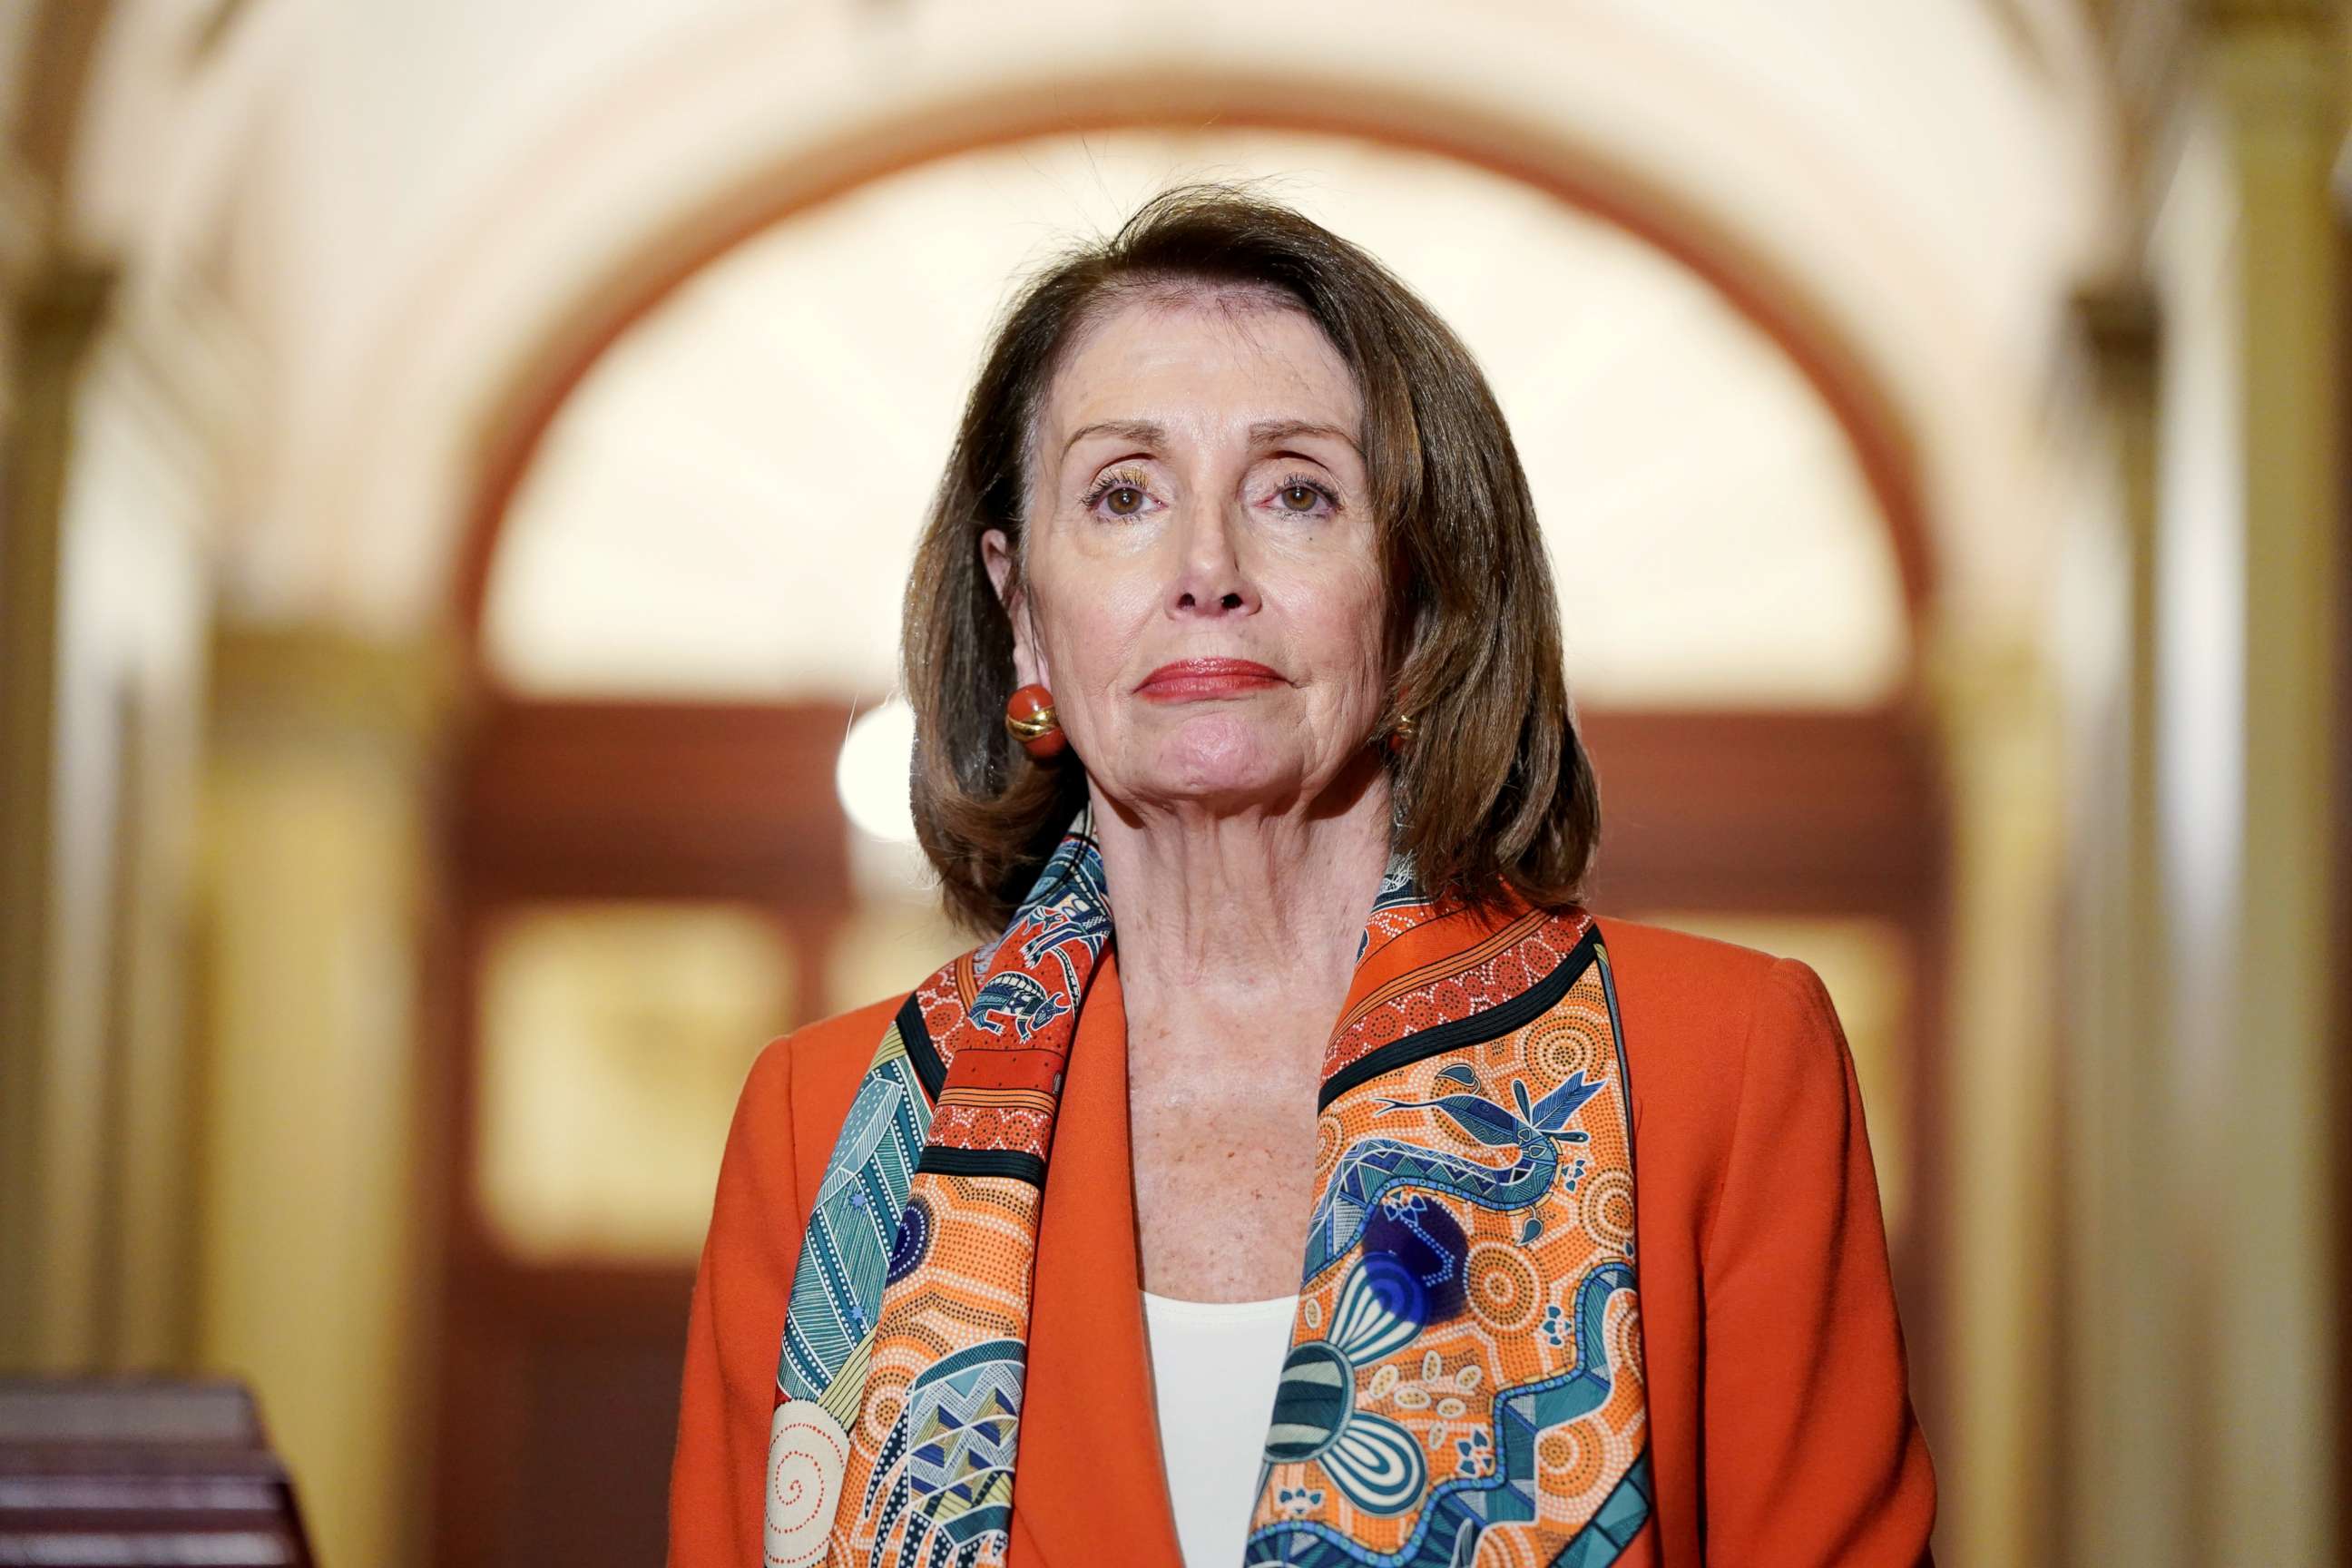 PHOTO: Speaker of the House Nancy Pelosi stands during a meeting with European Parliament President Antonio Tajani on Capitol Hill in Washington, Feb. 27, 2019.